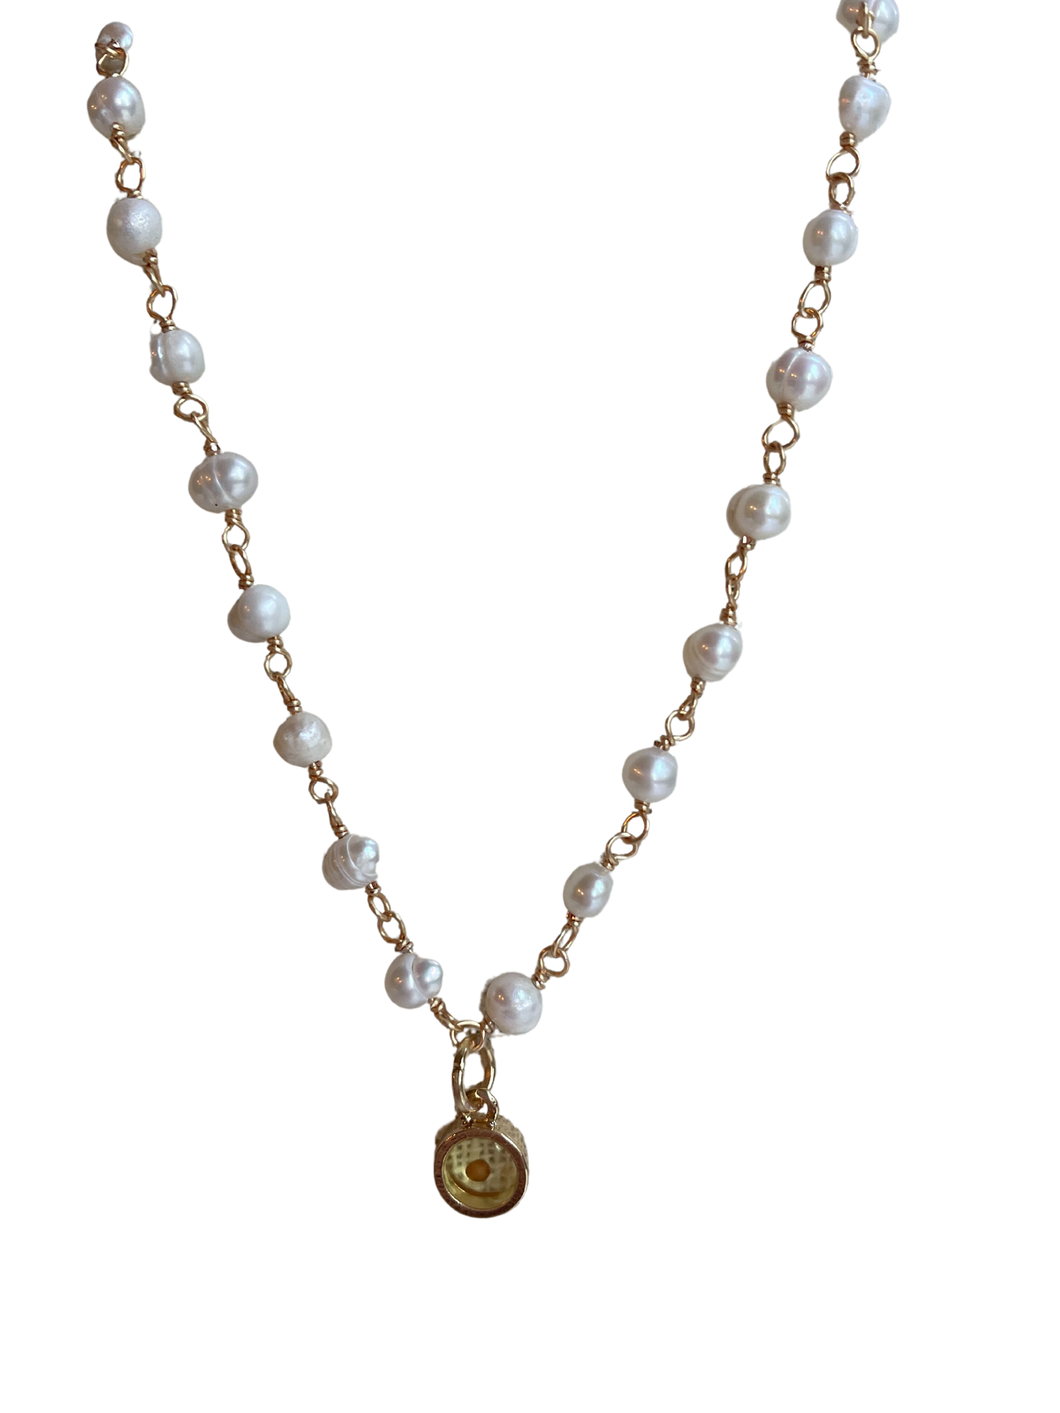 Mustard Seed Miniature Charm Necklace - Freshwater Pearl